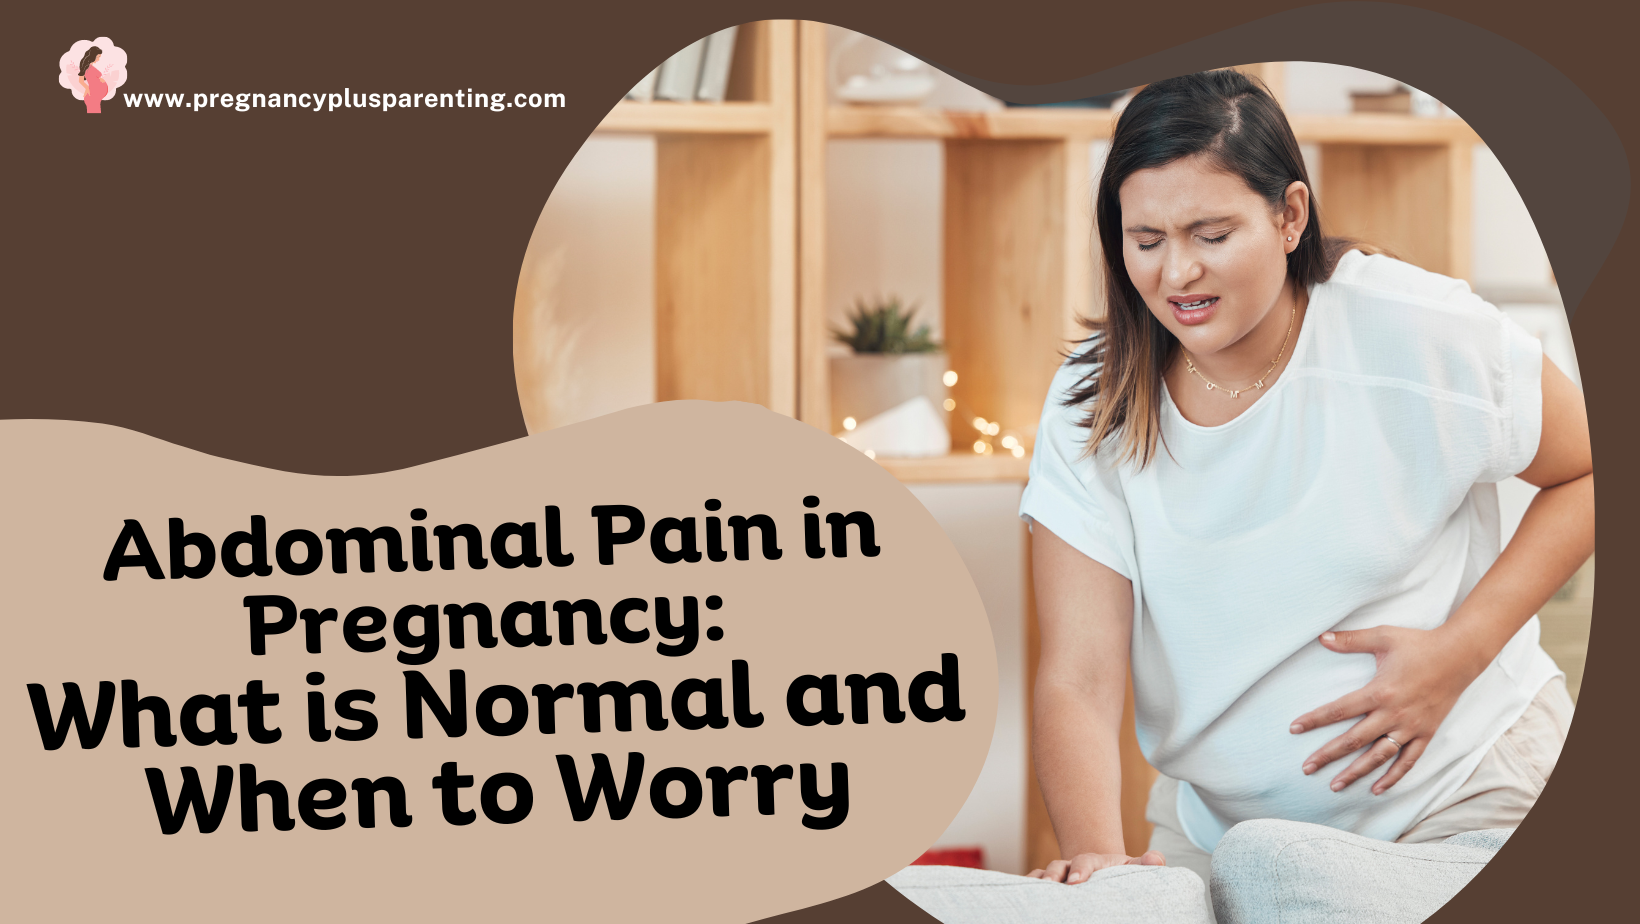 Abdominal Pain in Pregnancy: What is Normal and When to Worry